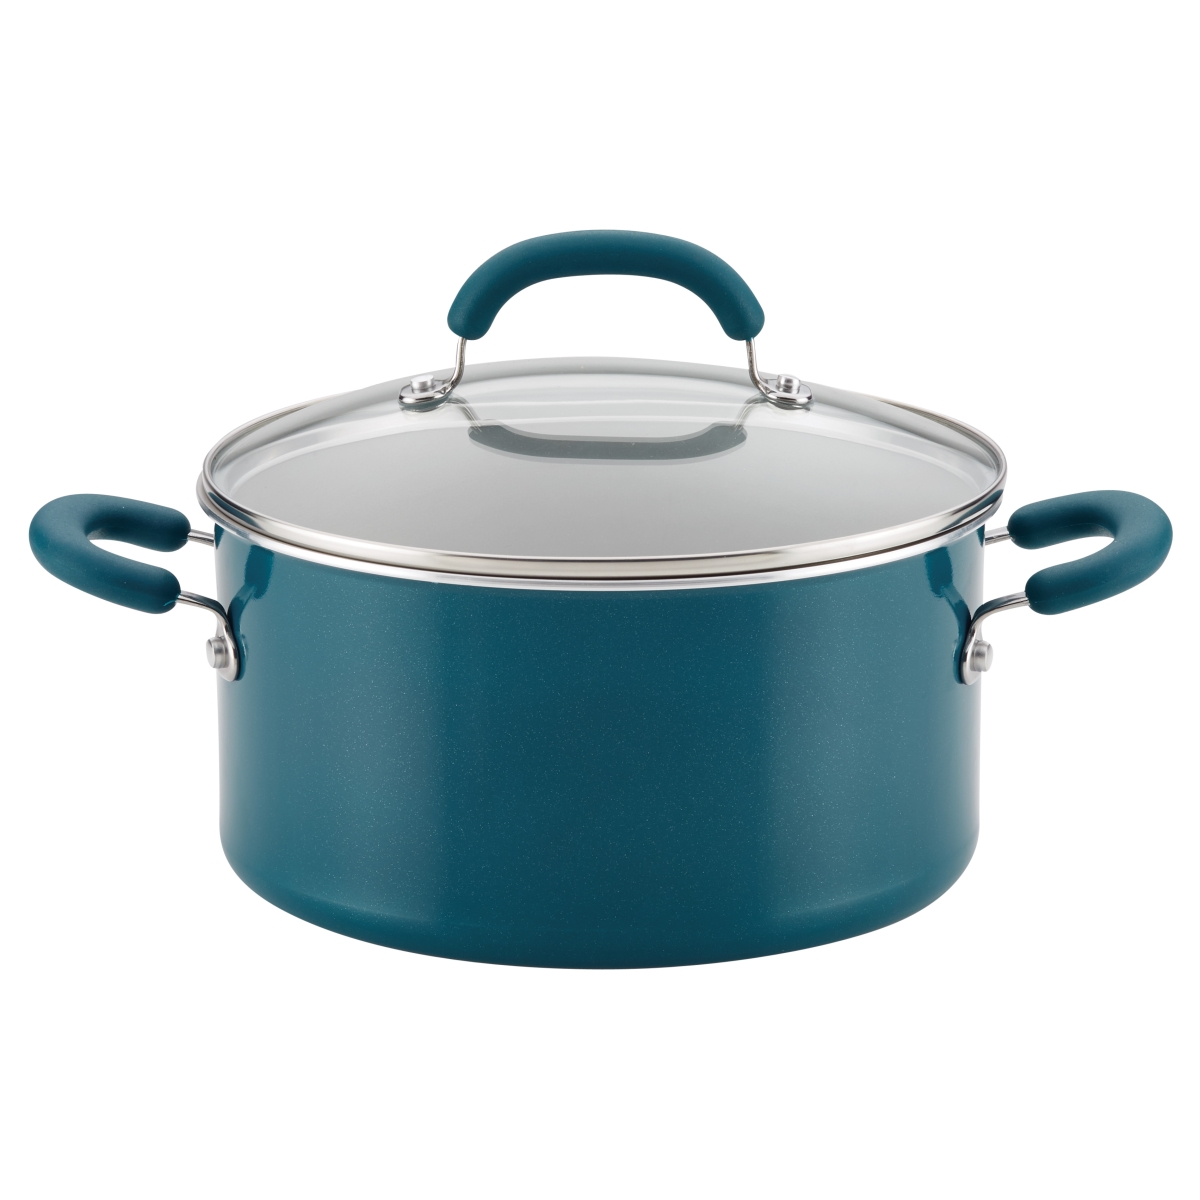 Picture of Rachael Ray 12163 6 qt. Create Delicious Aluminum Nonstick Stockpot - Teal Shimmer